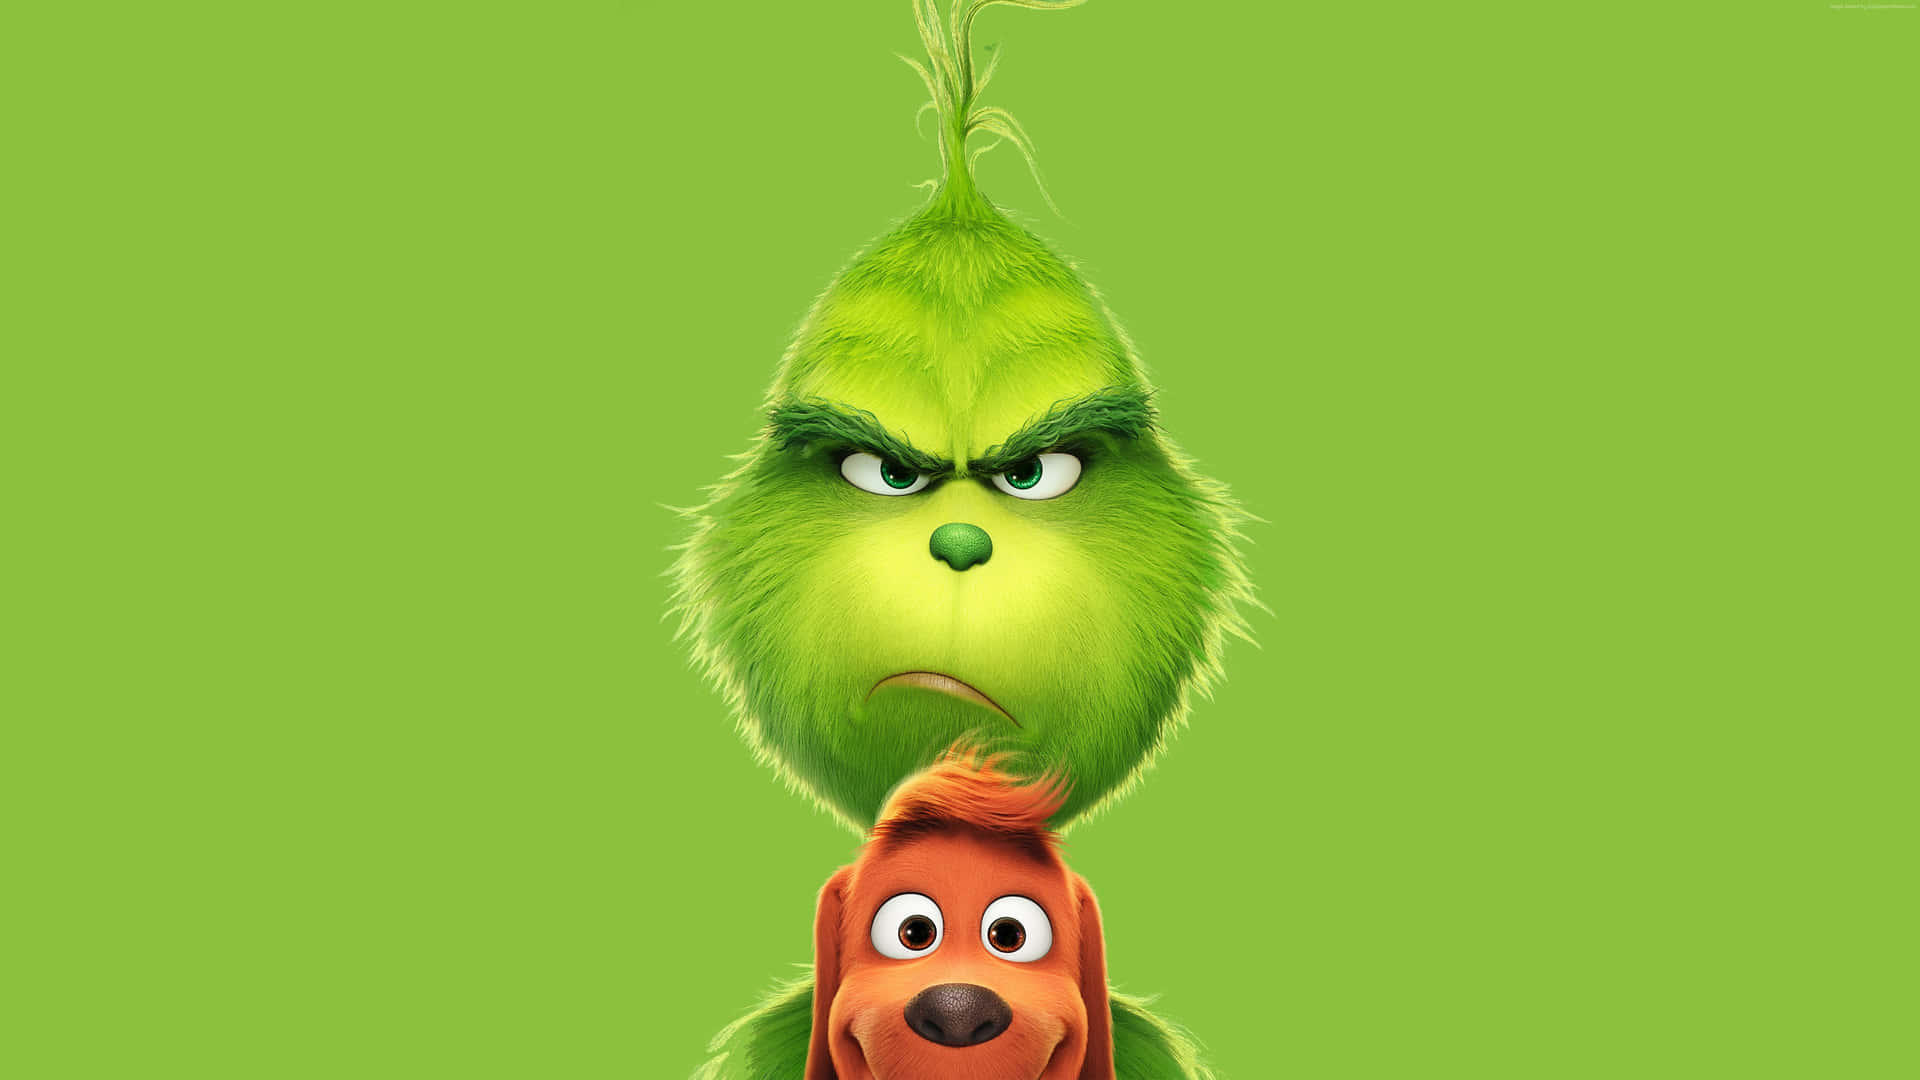 Spread holiday cheer this winter with the Grinch